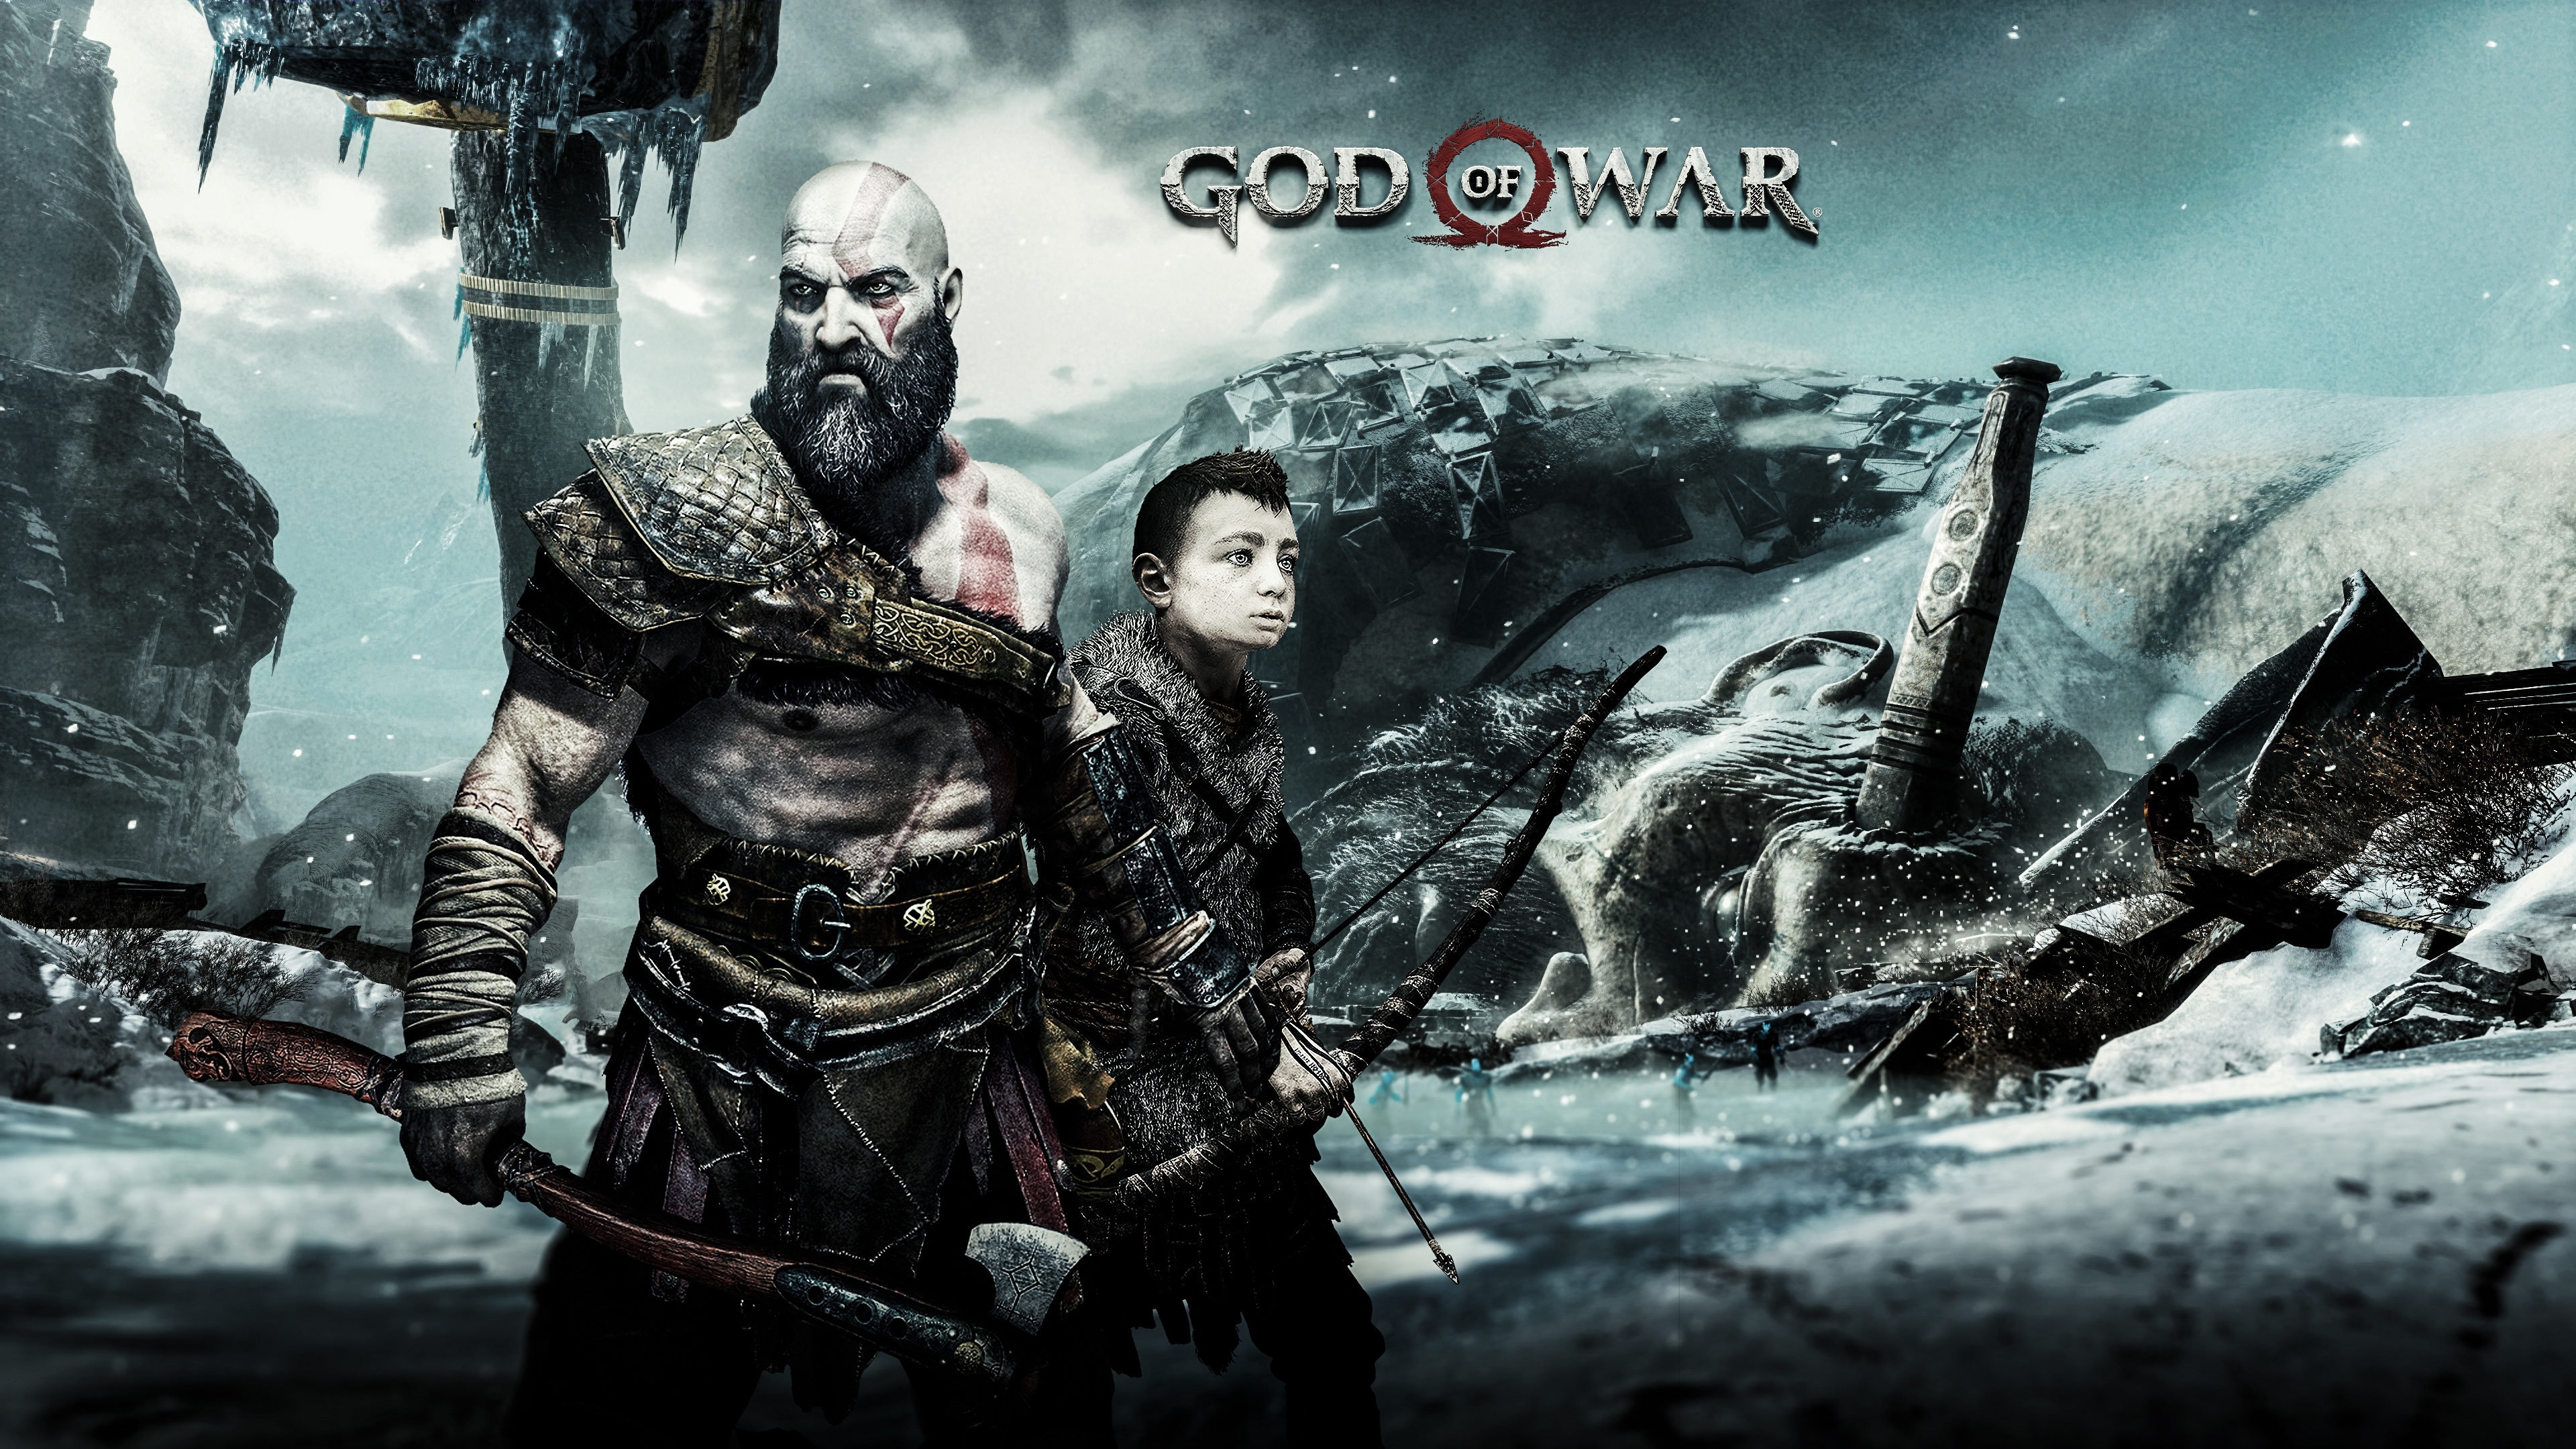 god wallpaper hd,action adventure game,movie,pc game,games,strategy video game